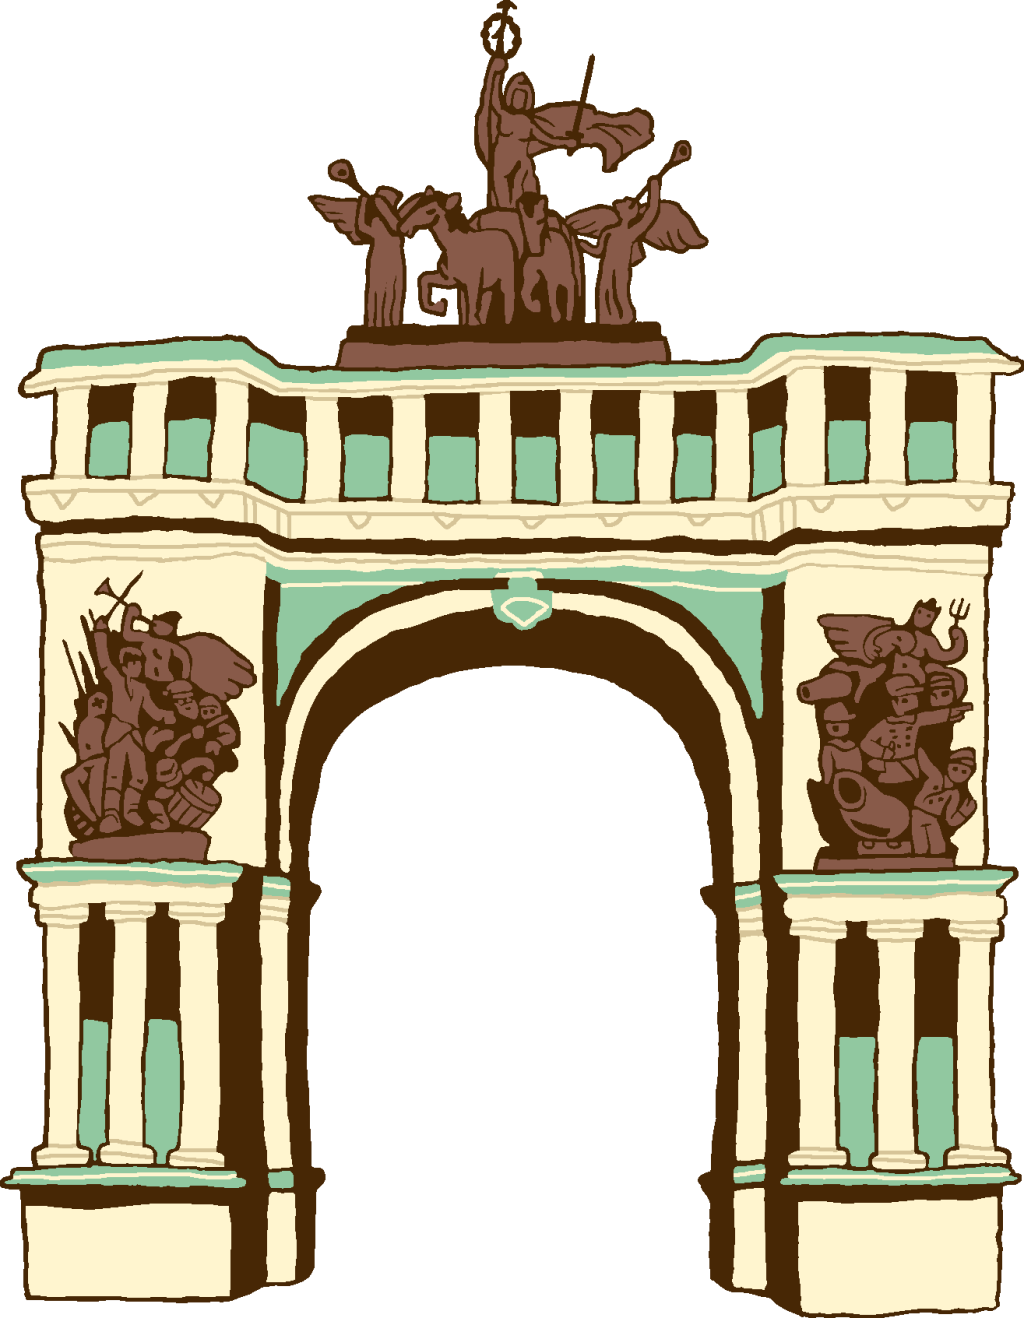 This is a cartoon version of the Grand Army Plaza arch.